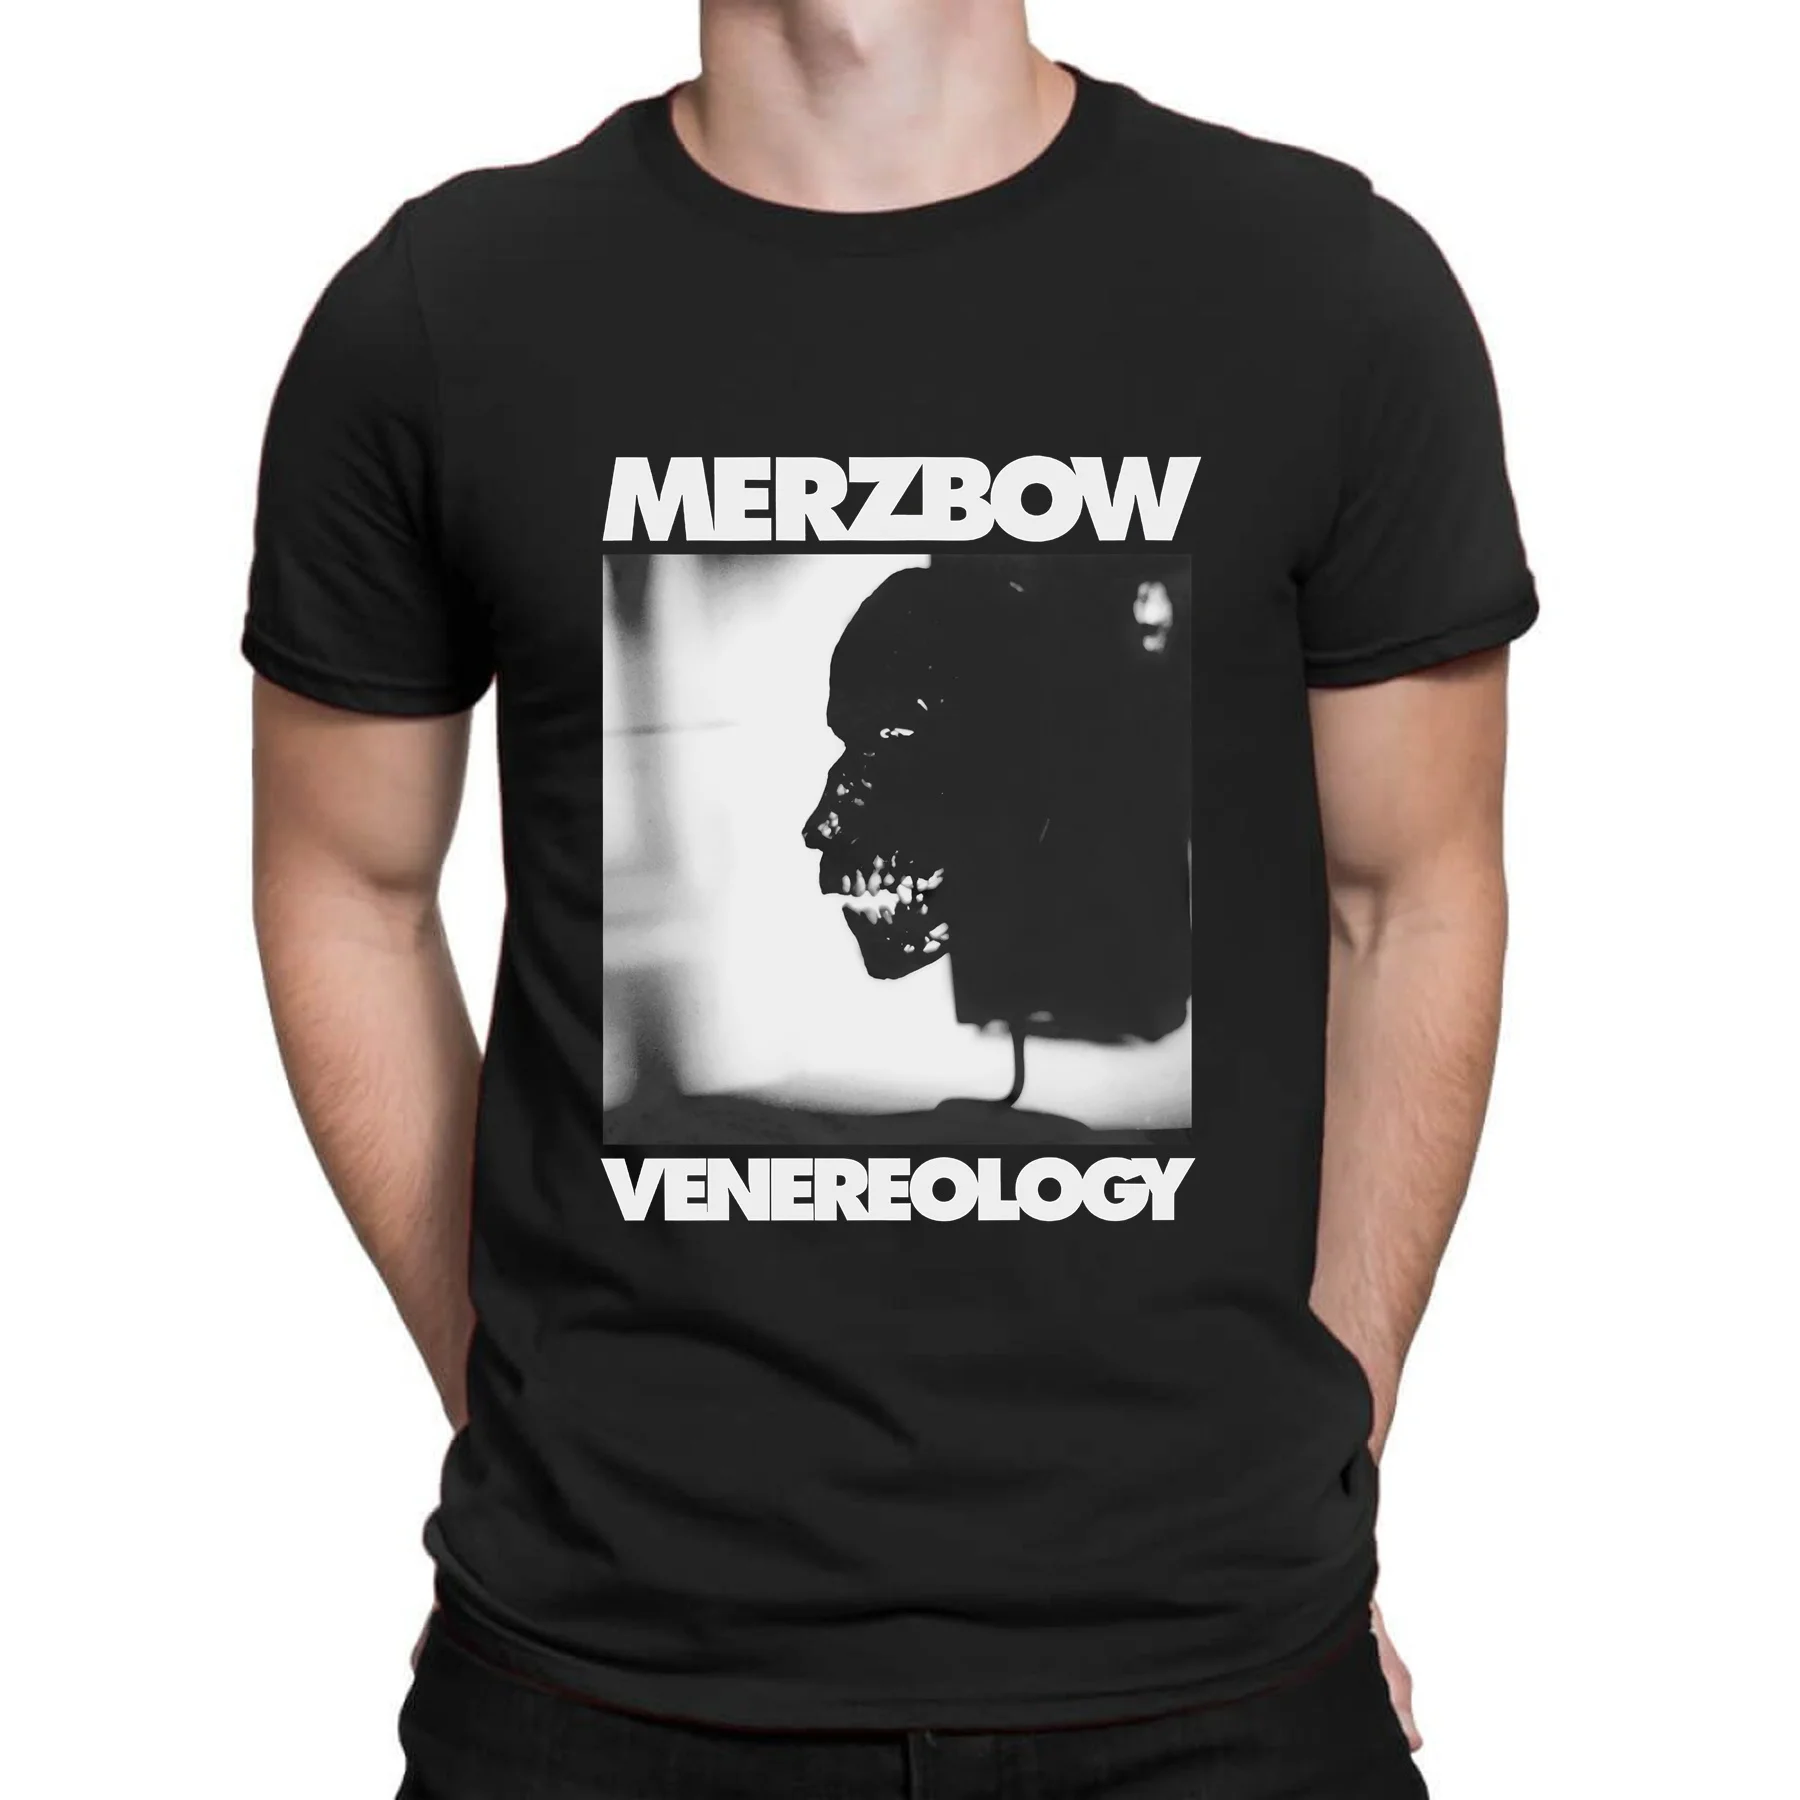 

Amazing Tees Male T Shirt Casual Oversized Merzbow Venereology Essential T-shirt Men T-shirts Graphic Streetwear S-3XL